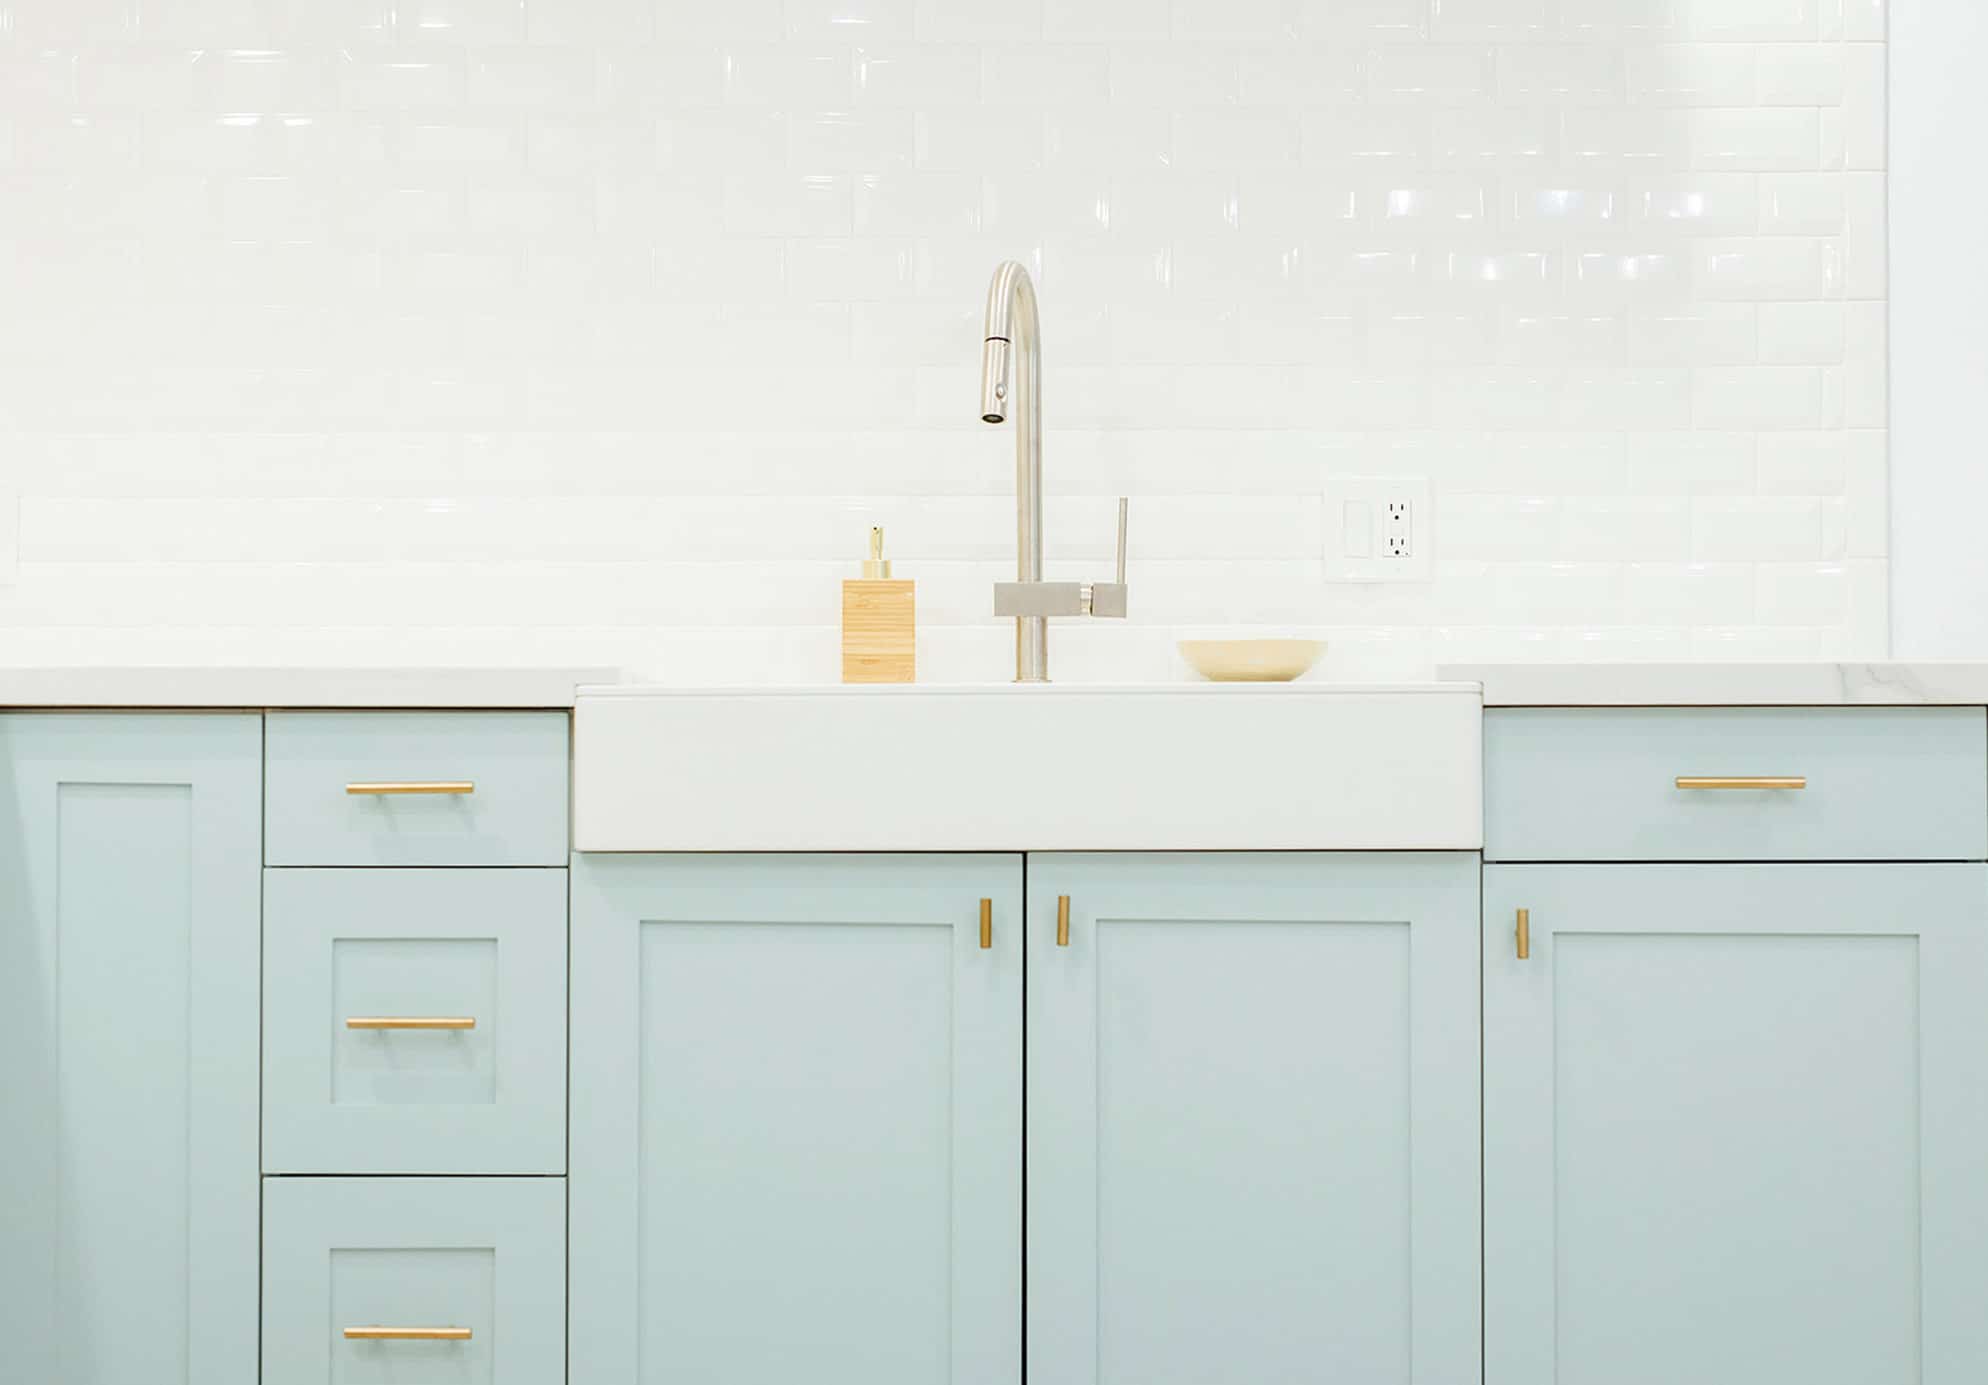 Colorful Appliances Take the Spotlight in Today's Kitchens